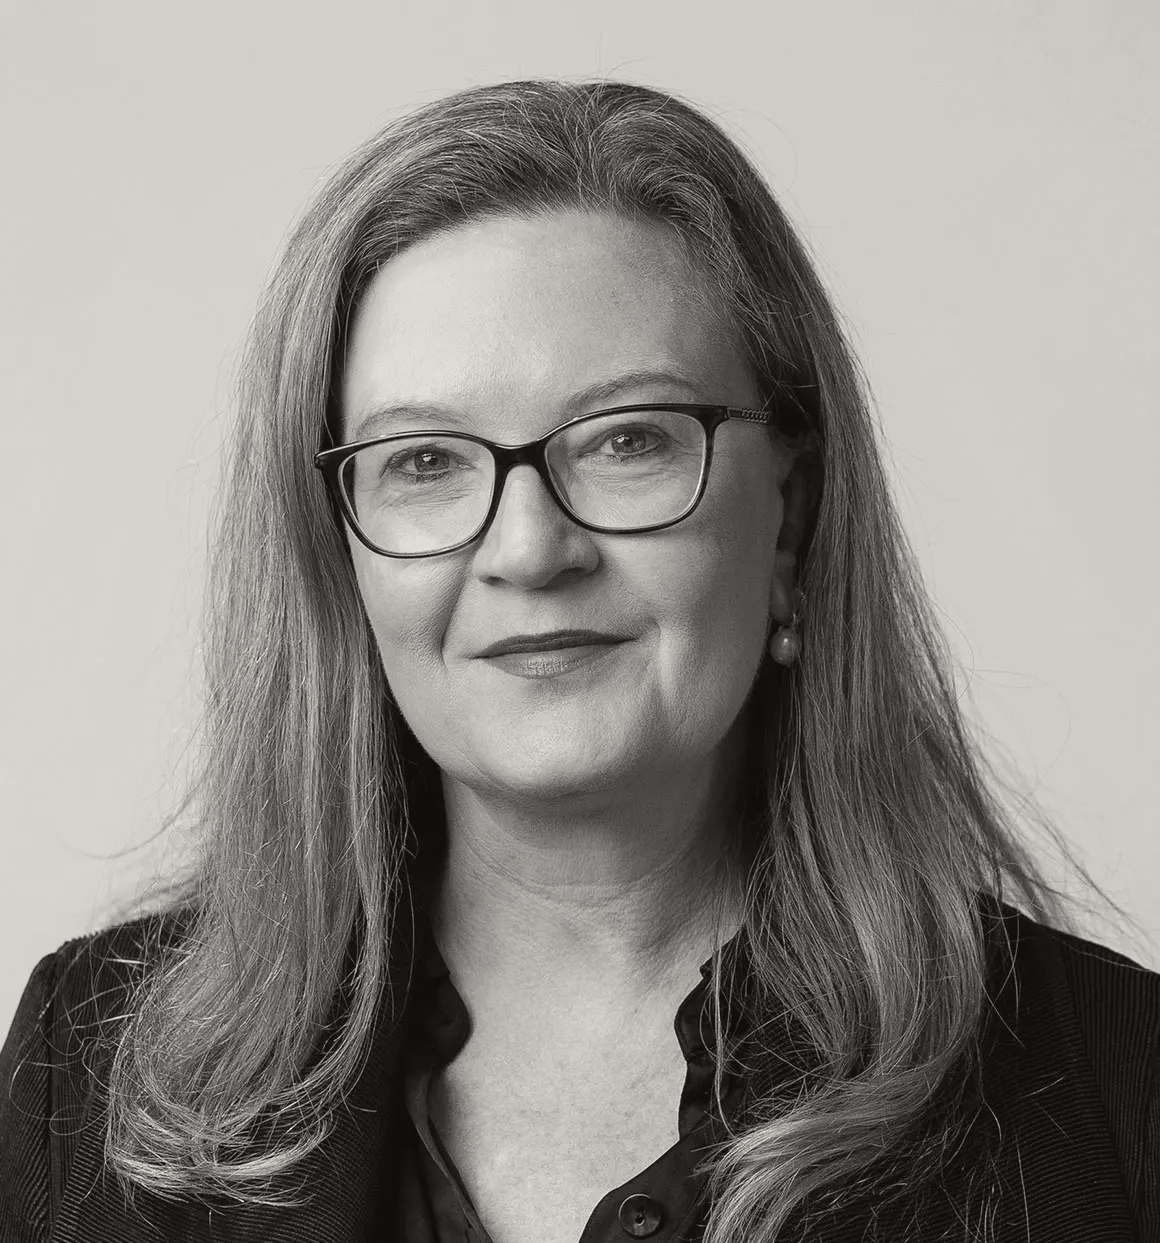 A black and white headshot of Emma McDonald. She has long hair, glasses, and is wearing a black shirt.